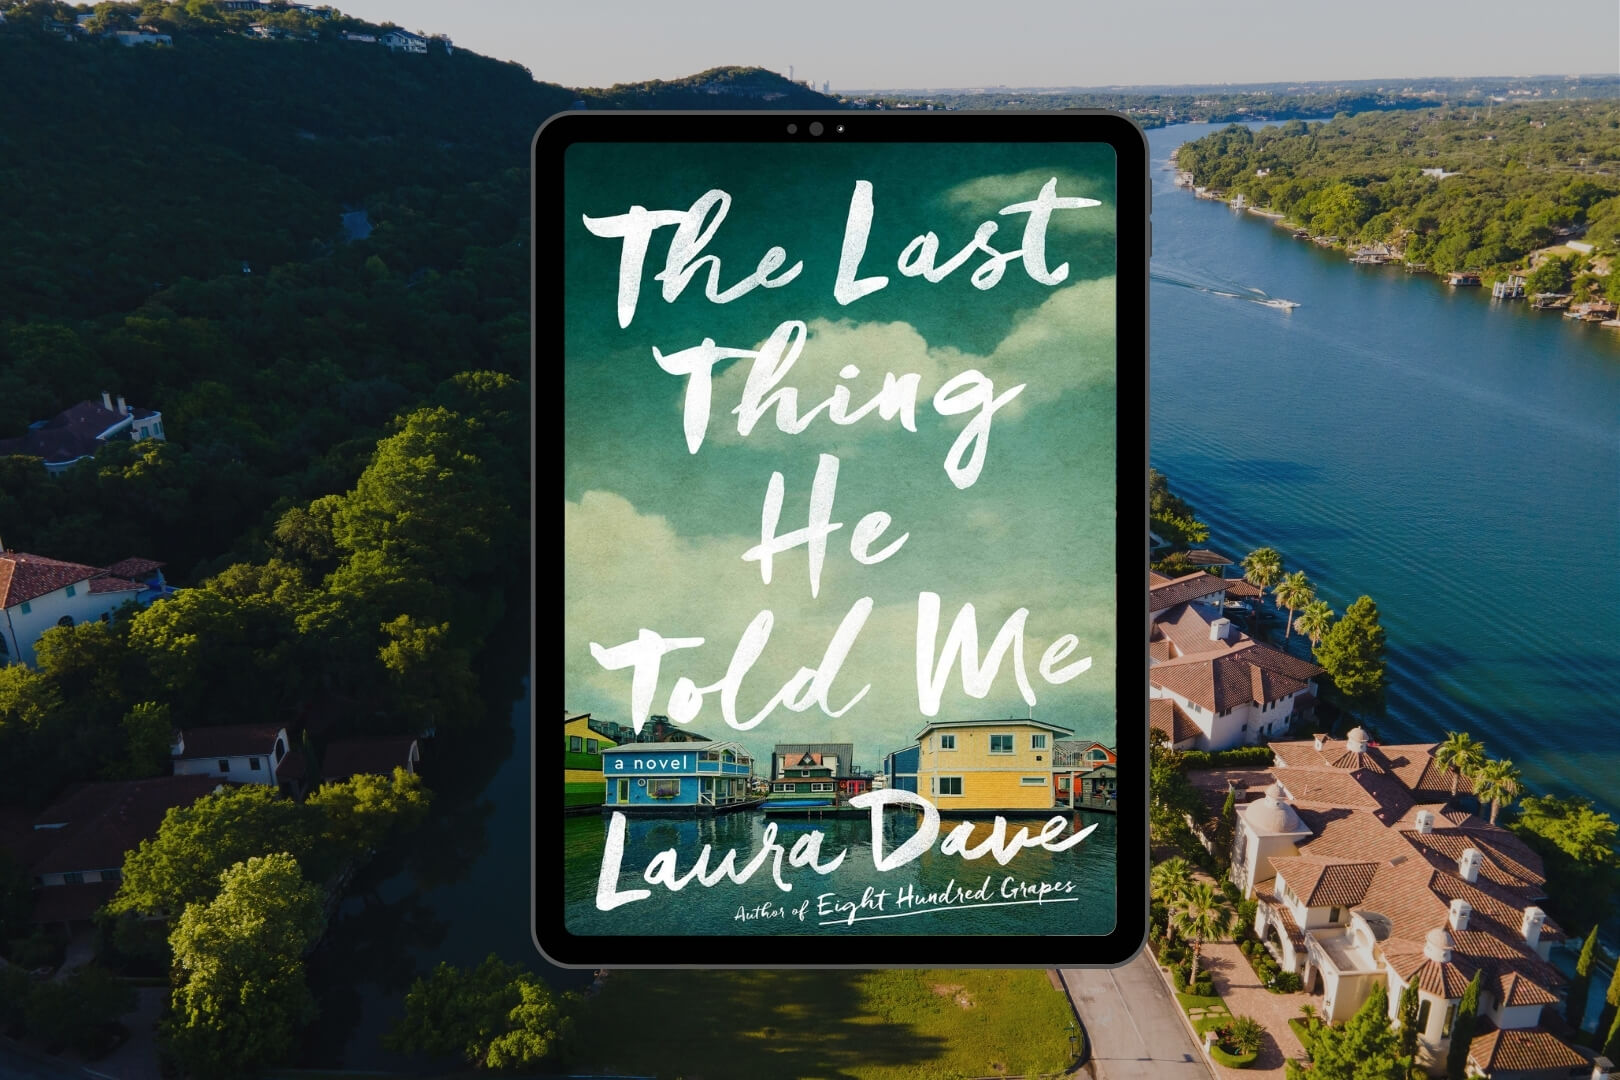 Review: The Last Thing He Told Me by Laura Dave